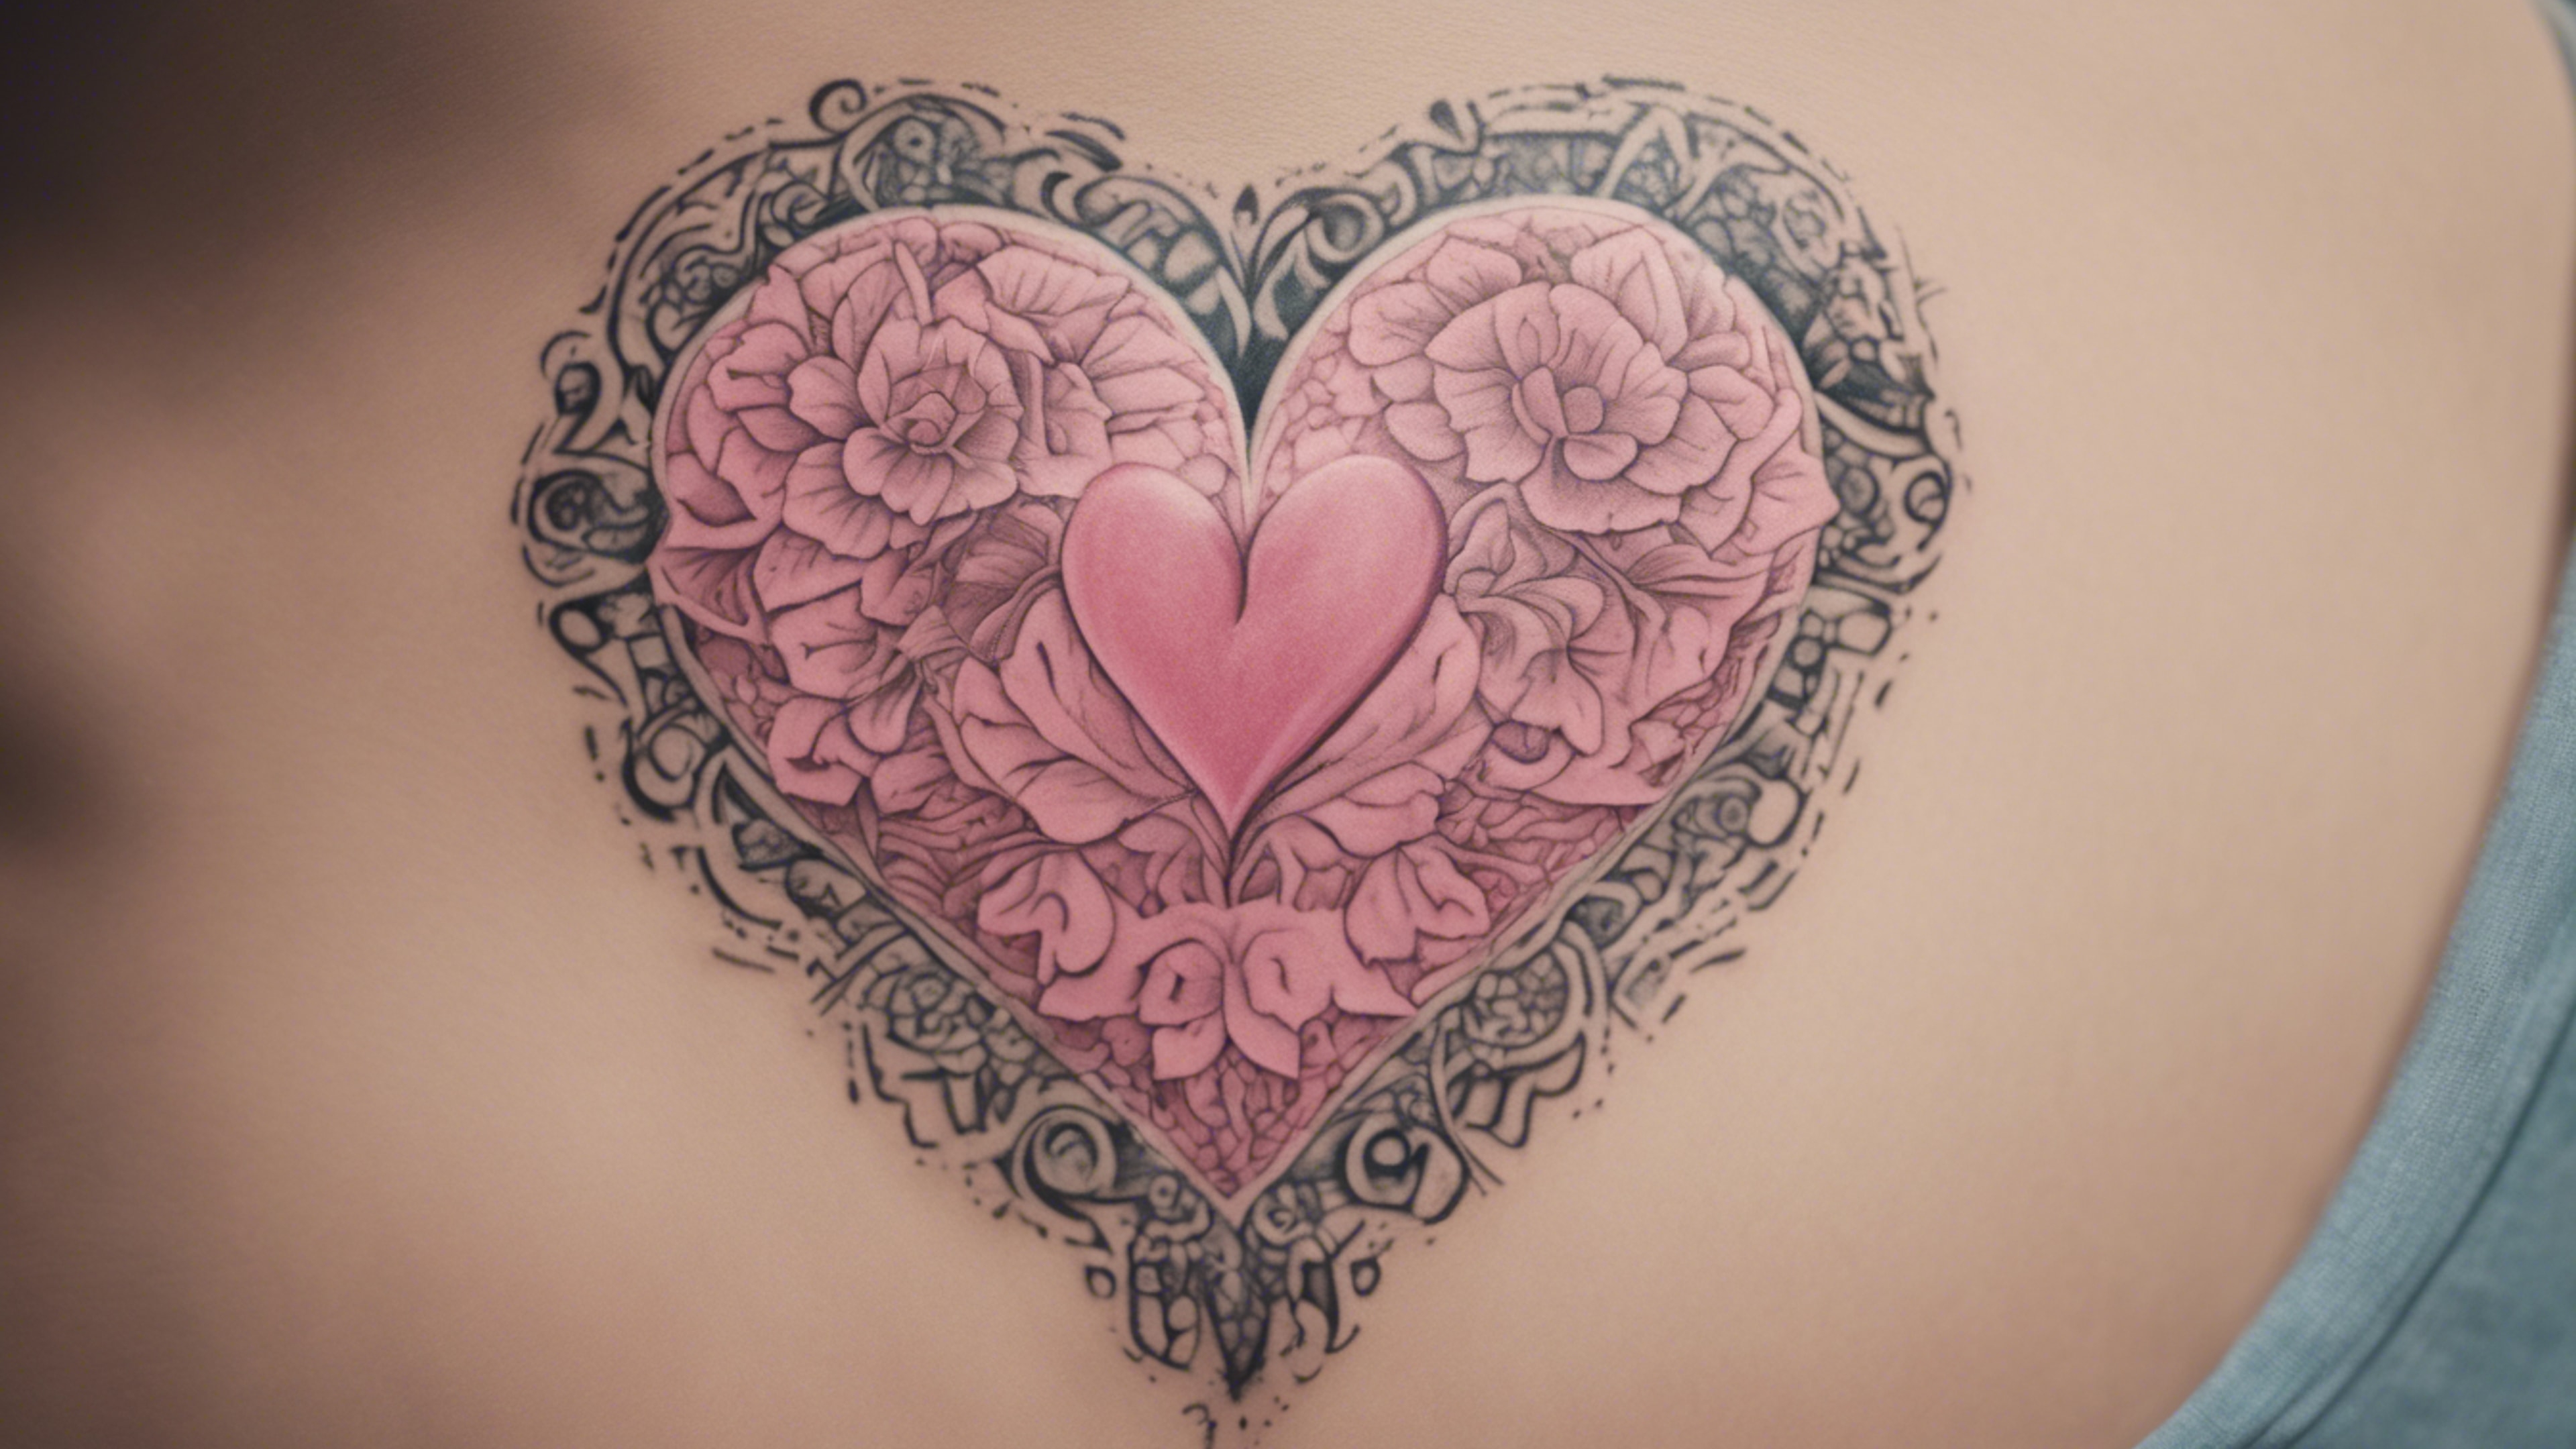 A small pink heart shaped tattoo embellished with intricate floral patterns. Валлпапер[dd23c5855ab44f40b2fe]